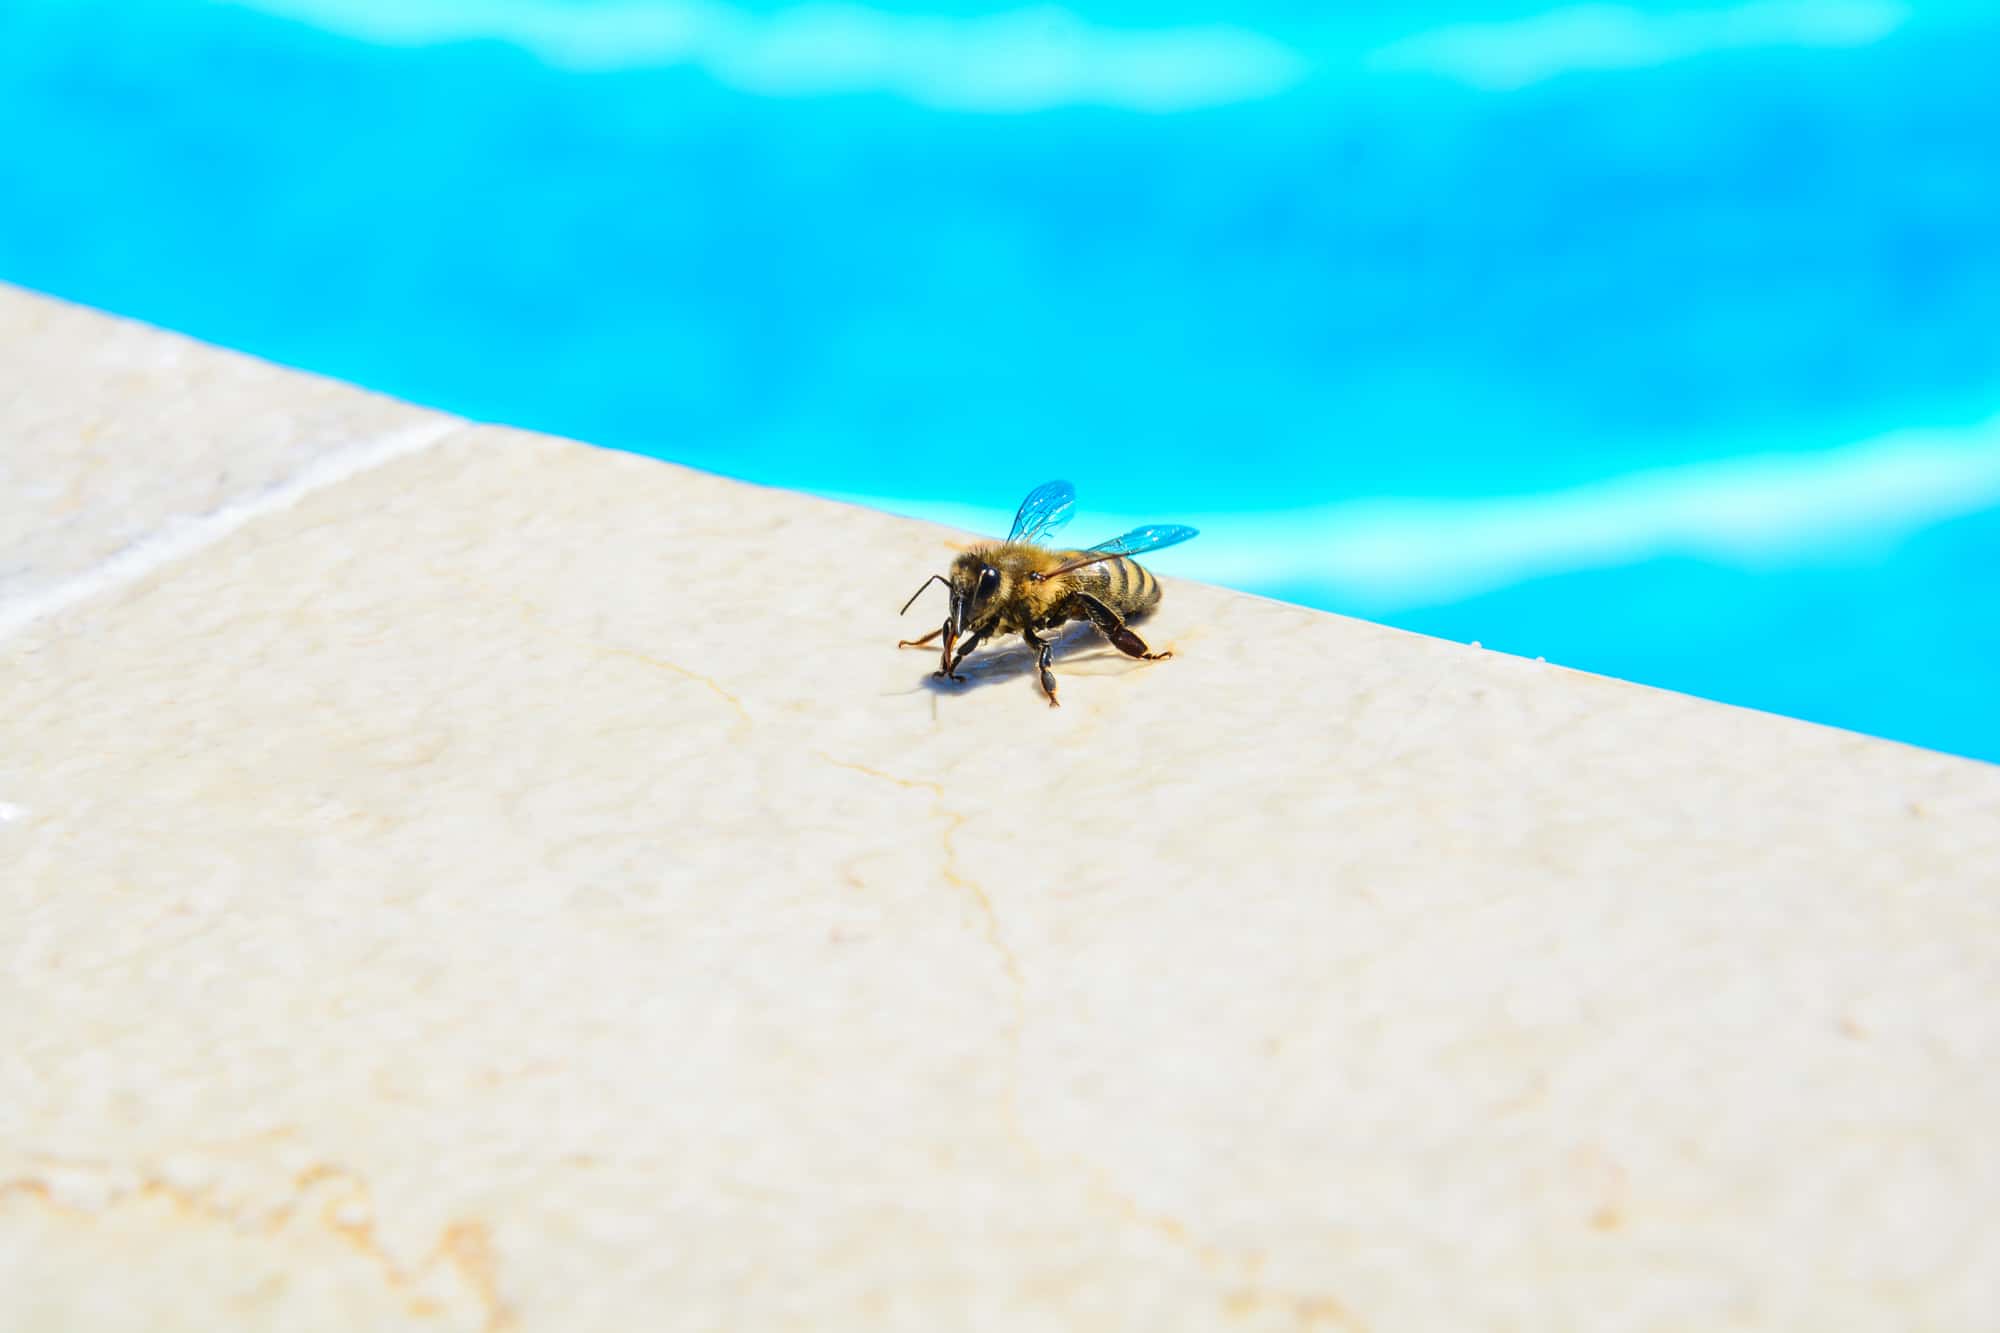 How to get rid of bees and wasps around a pool